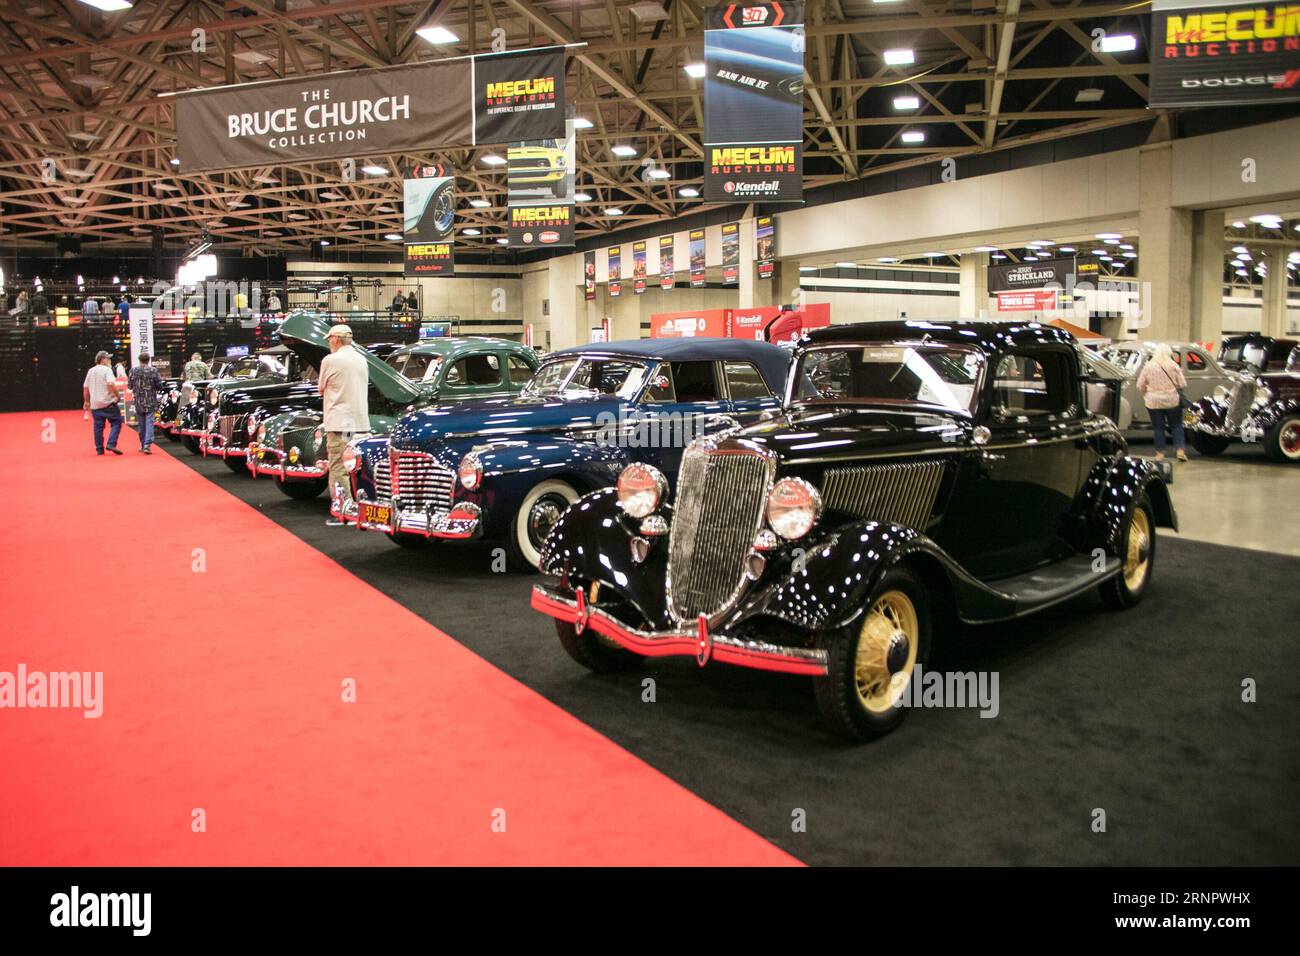 (170909) -- DALLAS, Sept. 9, 2017 -- Cars are displayed during a car auction hosted by Mecum Auctions in Dallas, Texas, the United States, Sept. 8, 2017. Around 1,000 cars were auctioned here on Friday. Tian Dan) (zcc) U.S.-DALLAS-CAR AUCTION gaolu PUBLICATIONxNOTxINxCHN Stock Photo